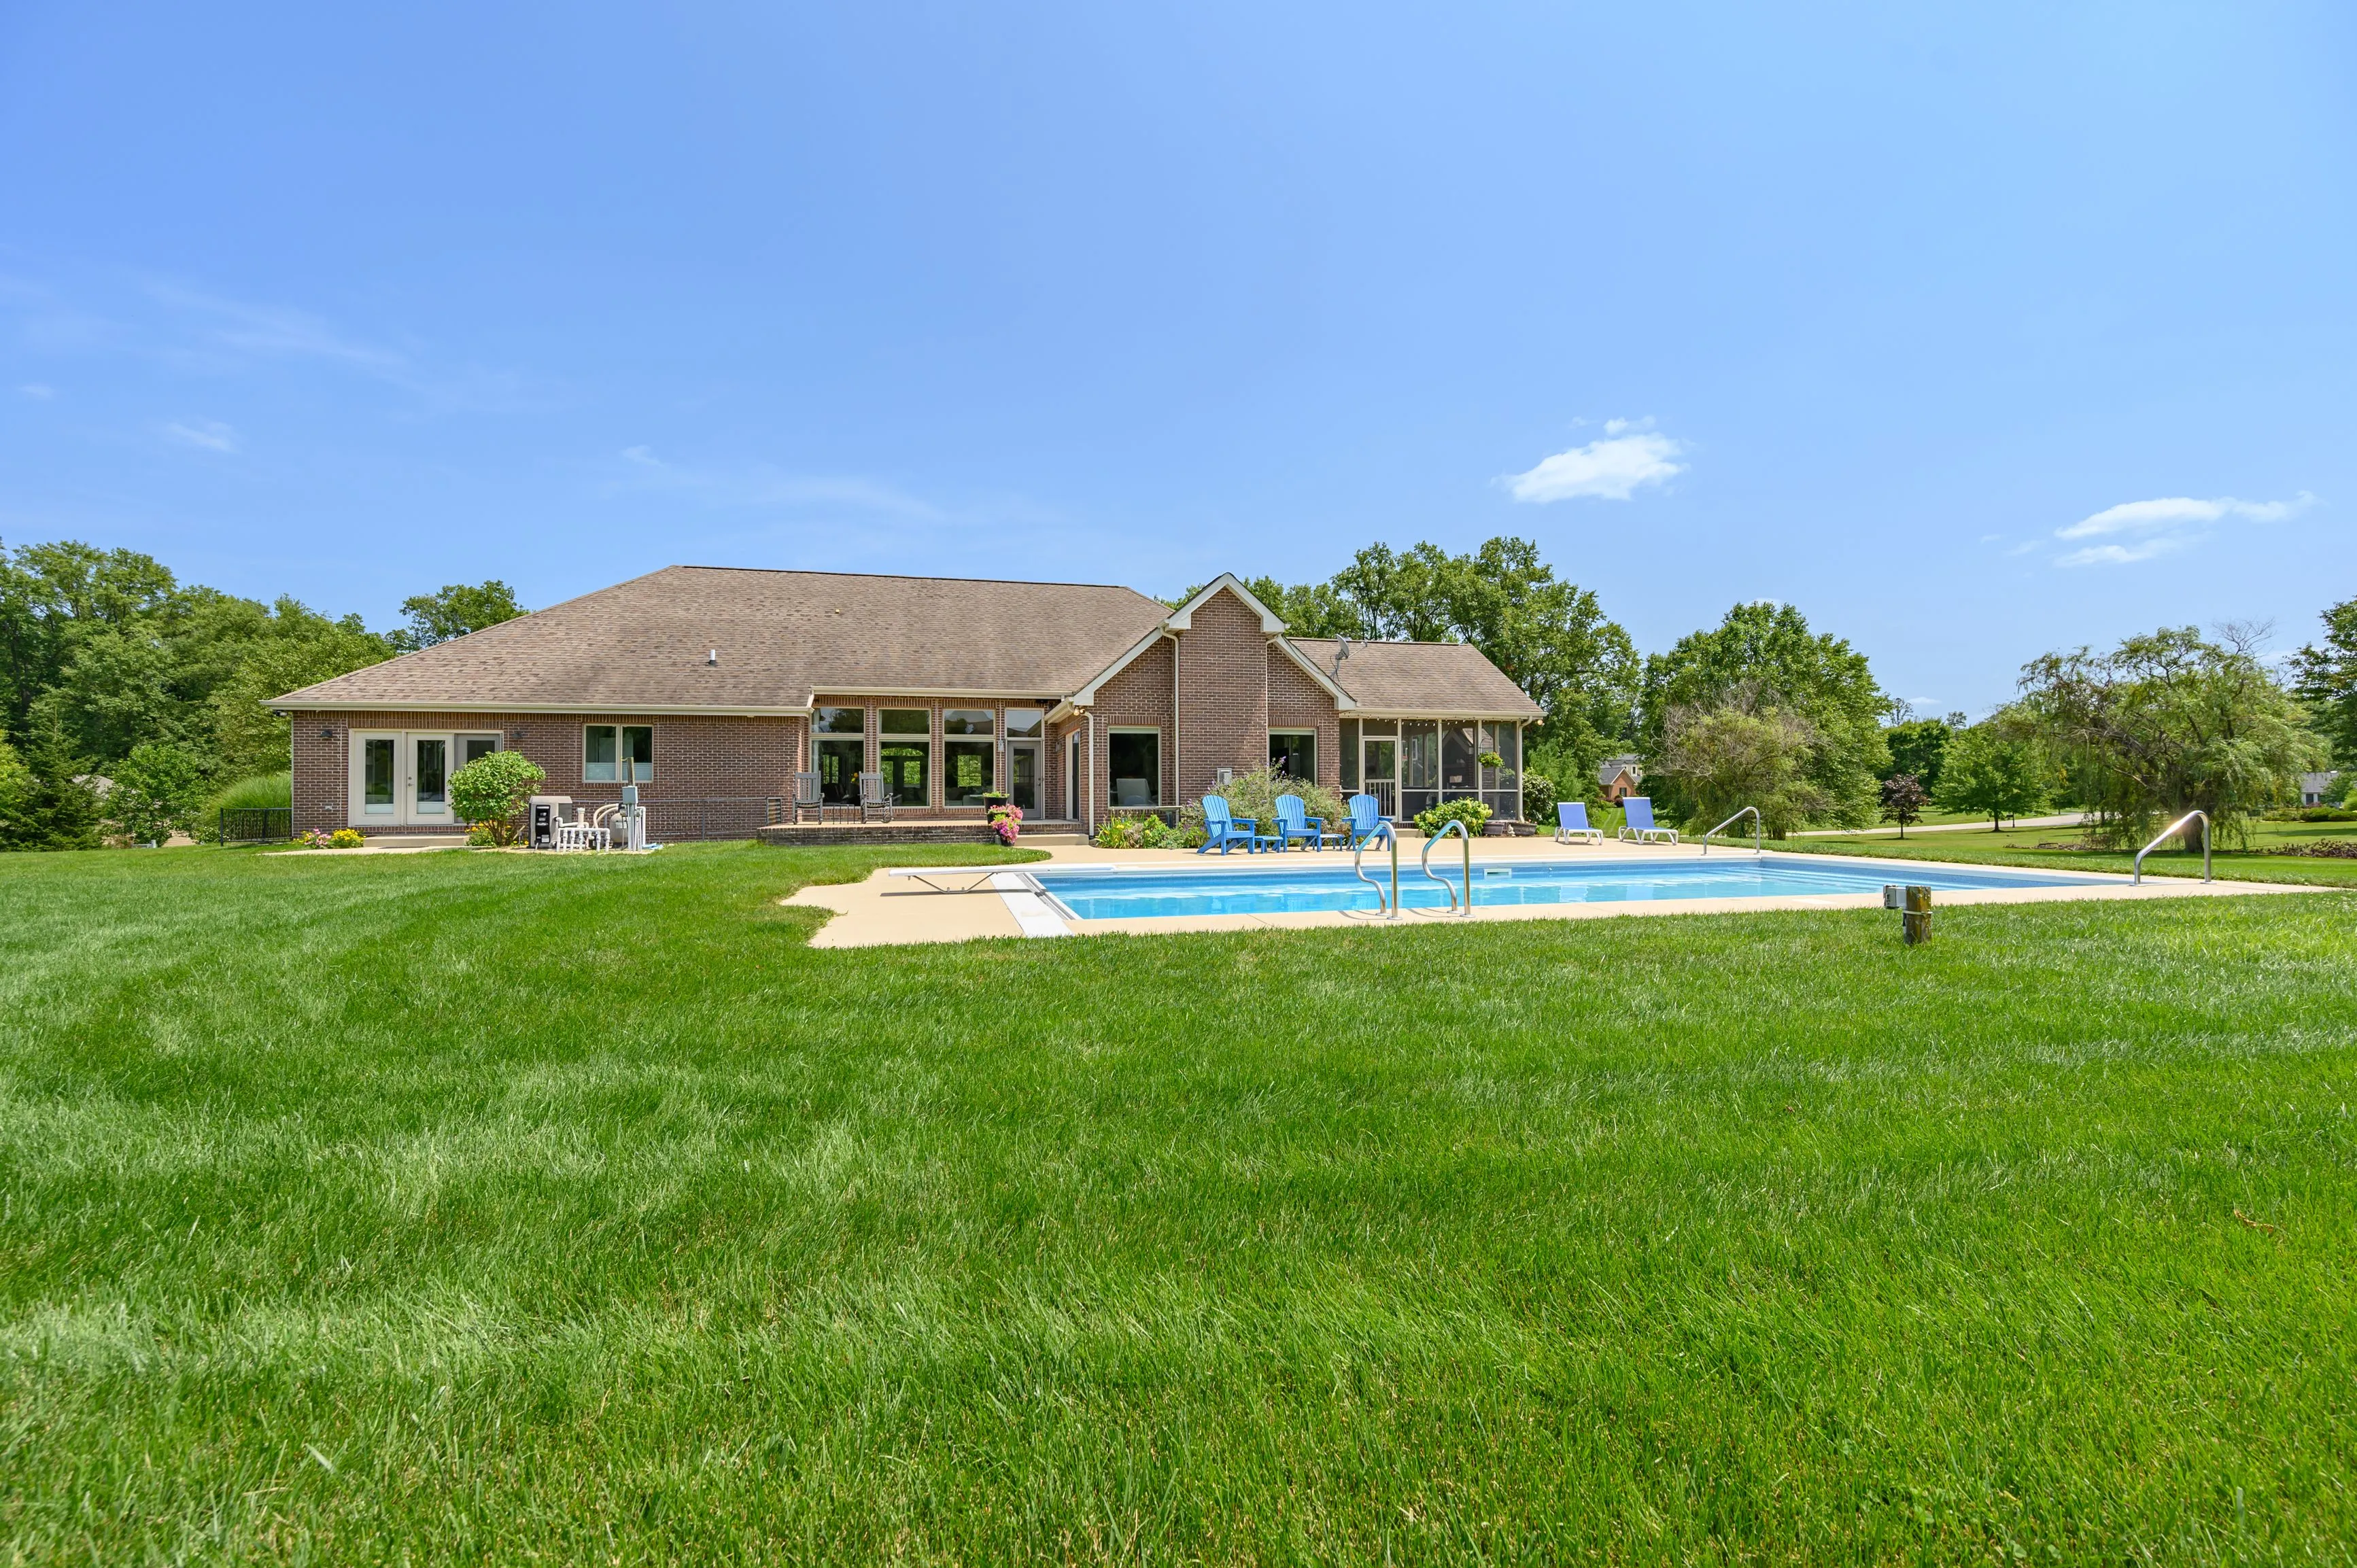 Single-story house with a shingled roof and an in-ground pool, surrounded by a large green lawn under a clear blue sky.